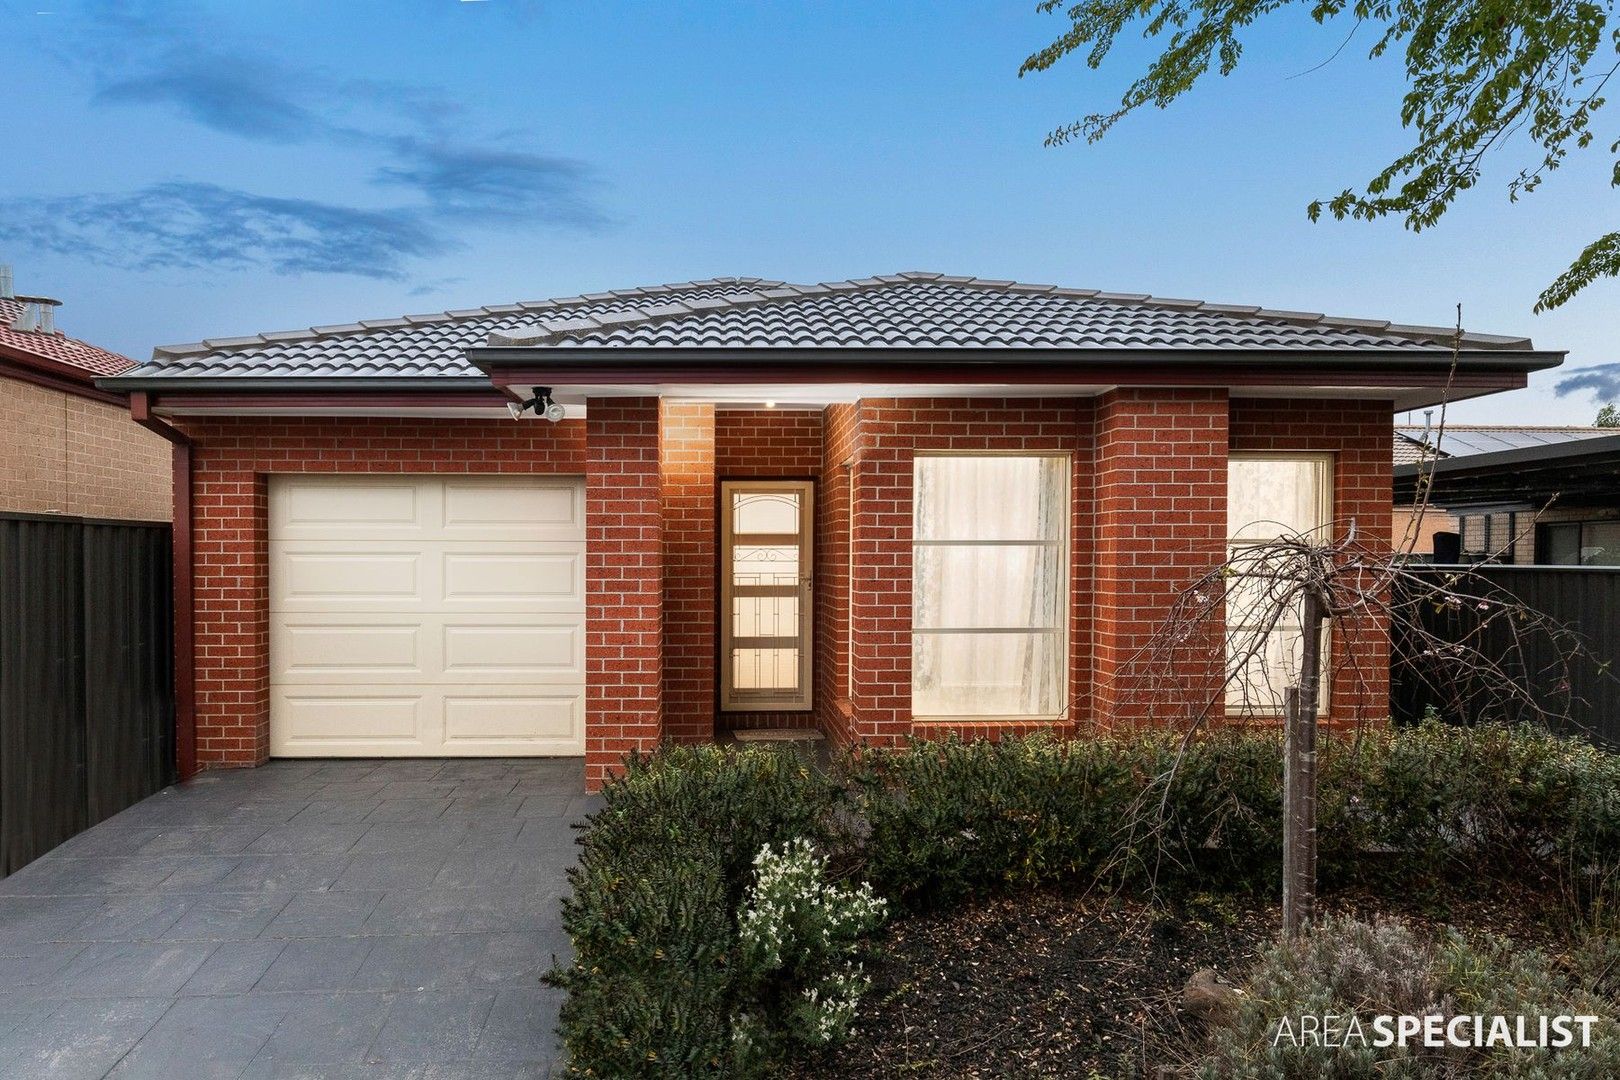 3 bedrooms House in 4 Firecrest Road MANOR LAKES VIC, 3024